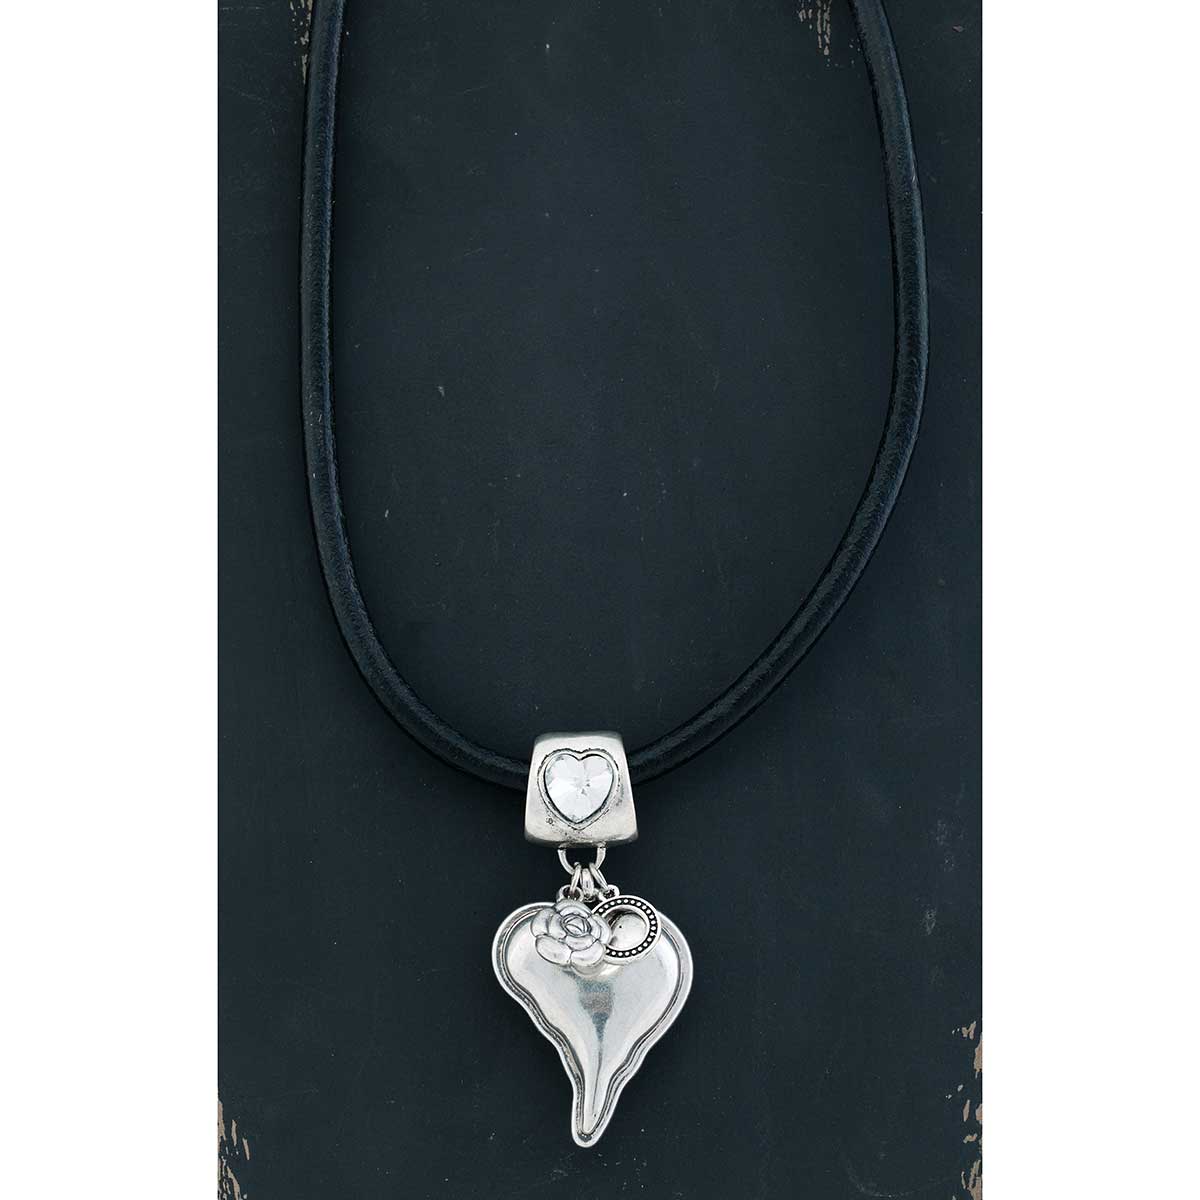 Silver Heart with Crystal/Black Cord Necklace 19"-22"